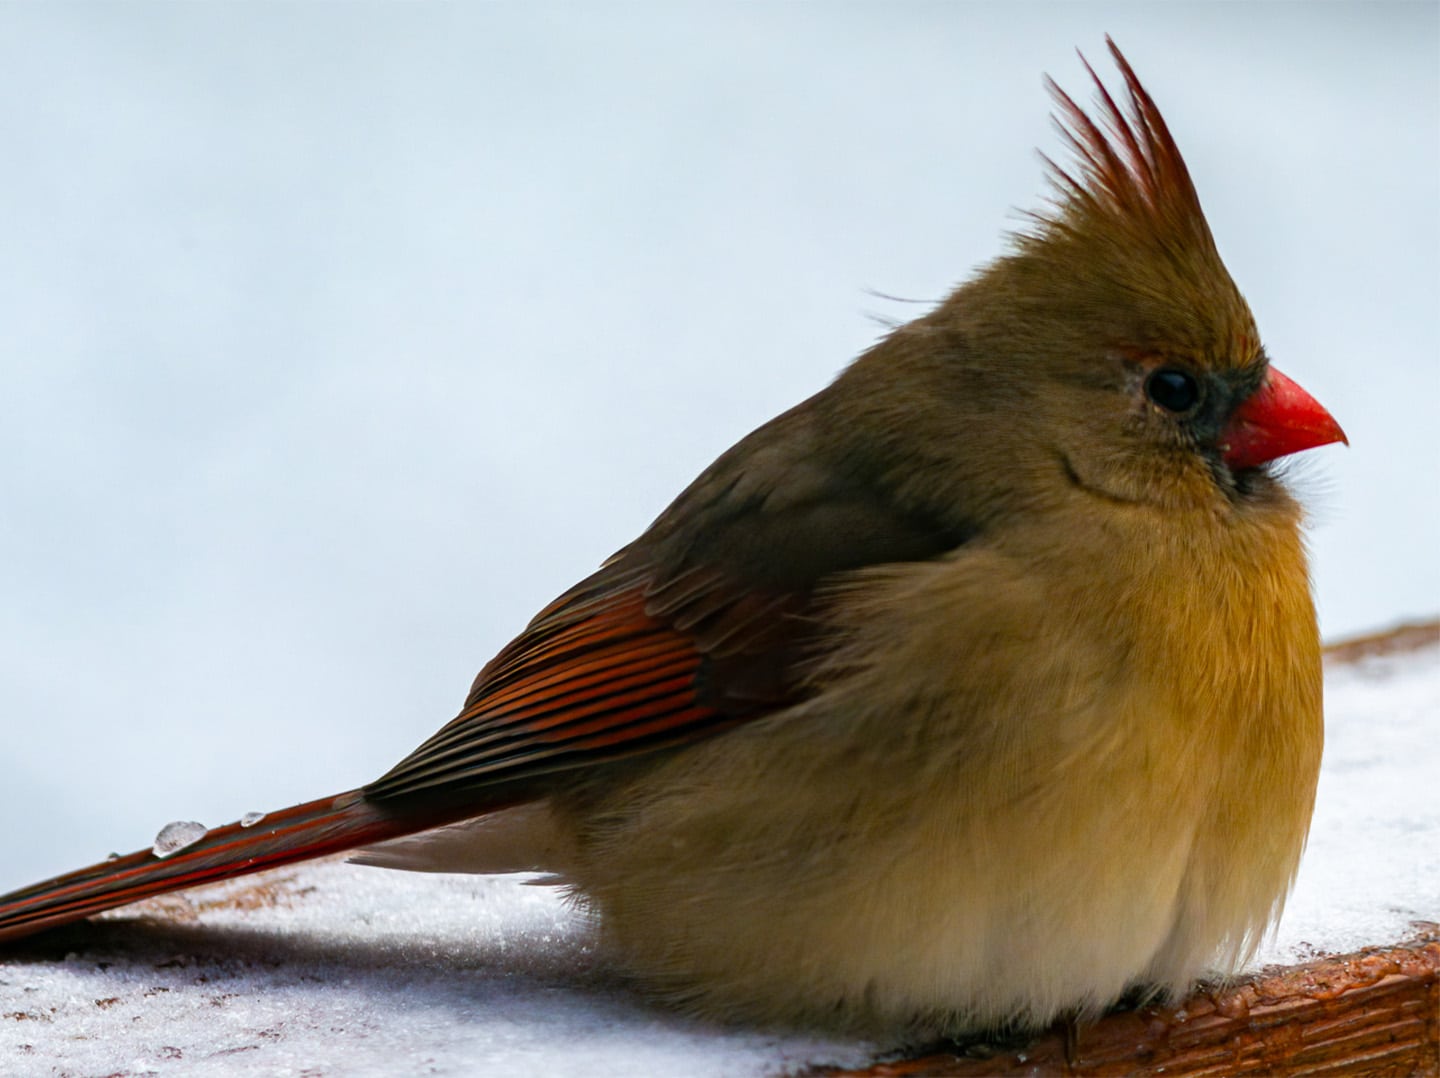 A vibrantly colored Northern Cardinal Perched on a snow covered board